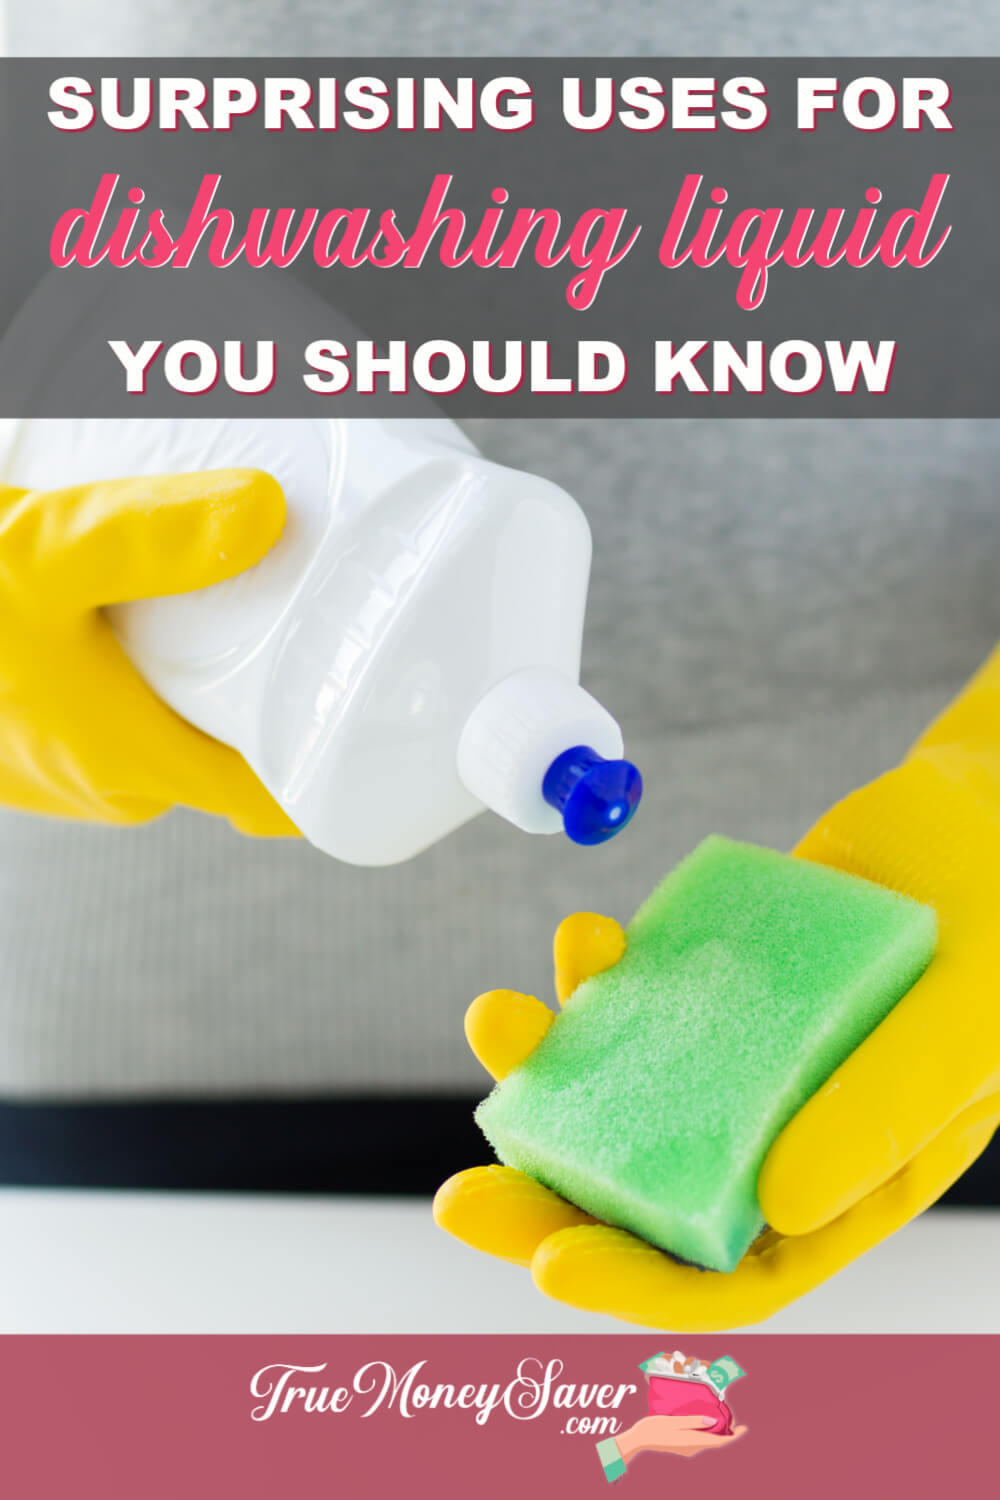 5 Surprising Uses For Dishwashing Liquid You Should Know